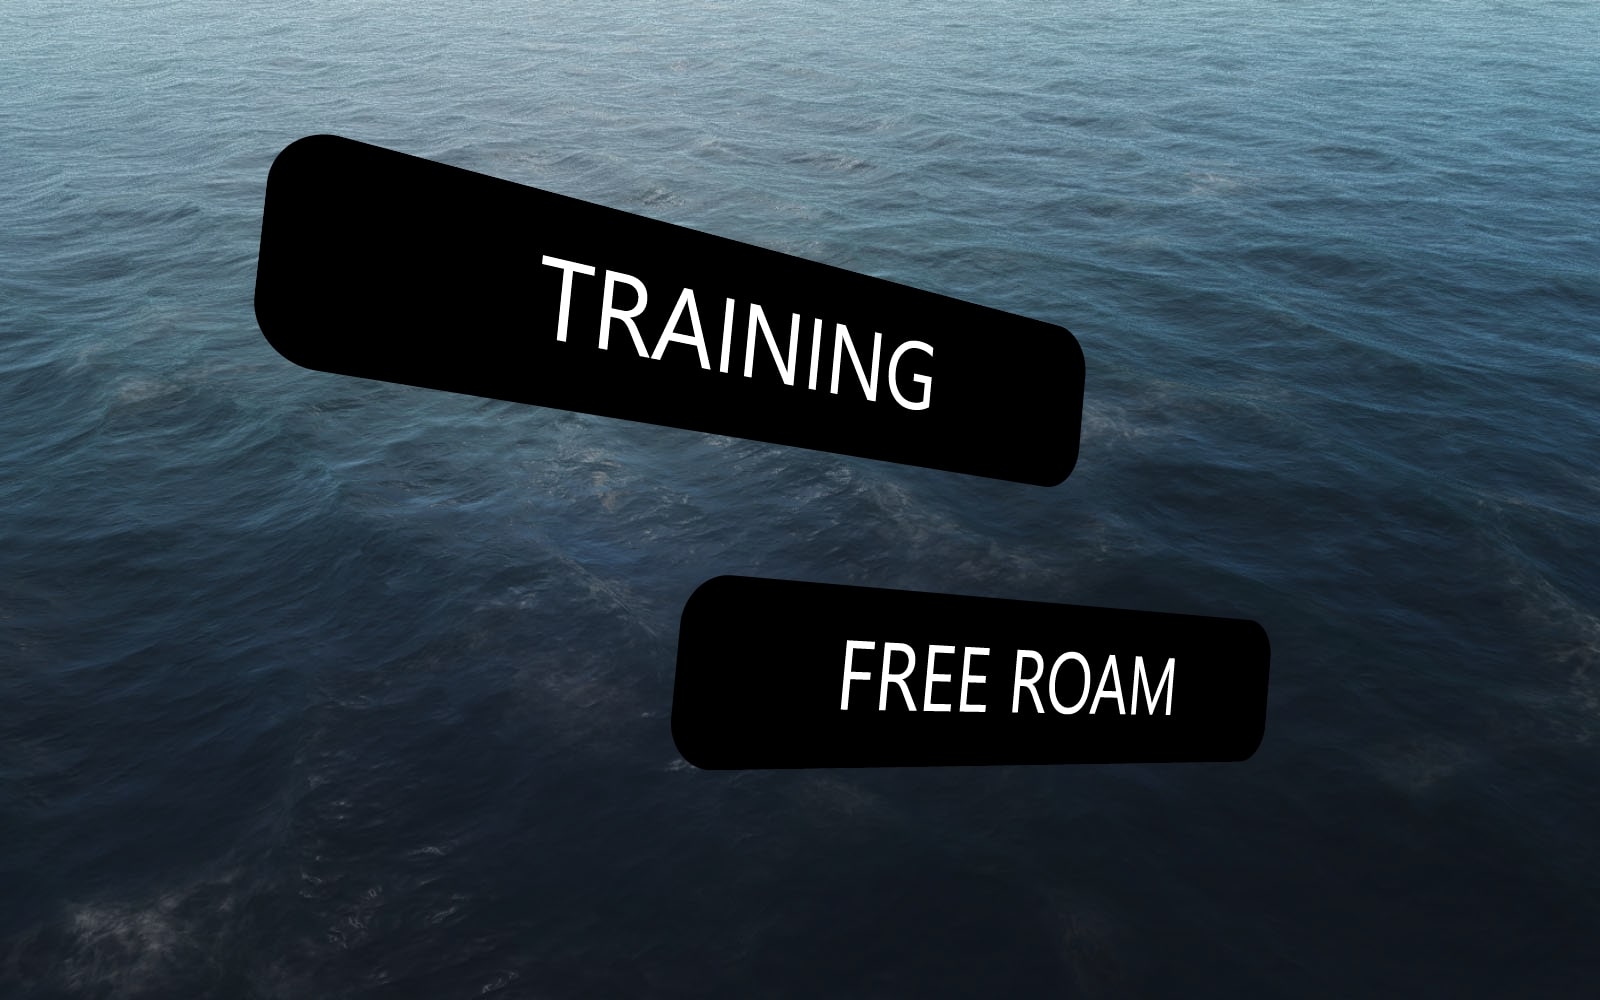 features - training mode